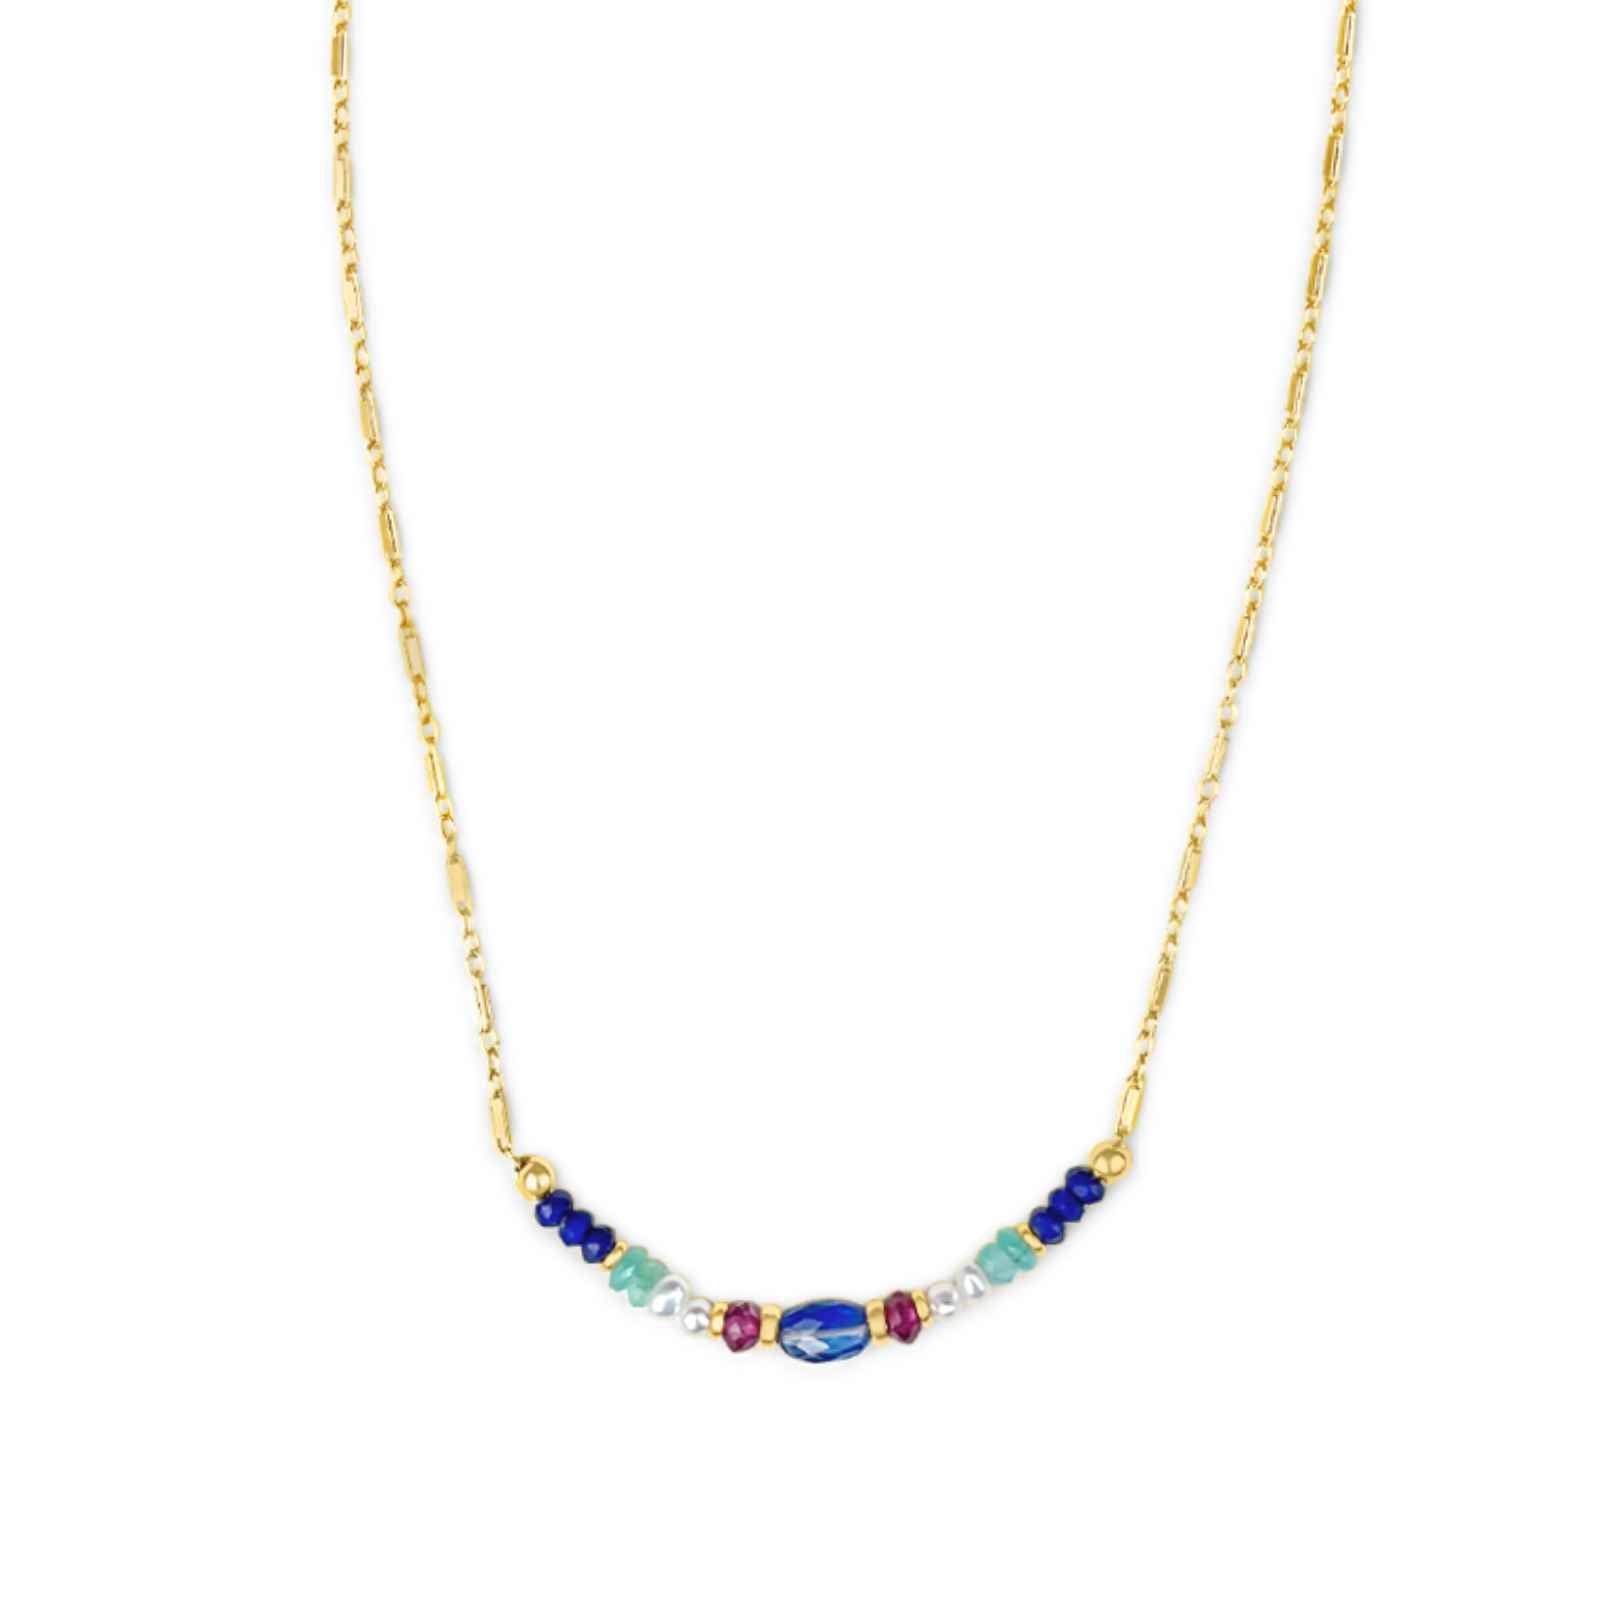 Sapphire Gemstone Beaded Necklace - Camille Jewelry